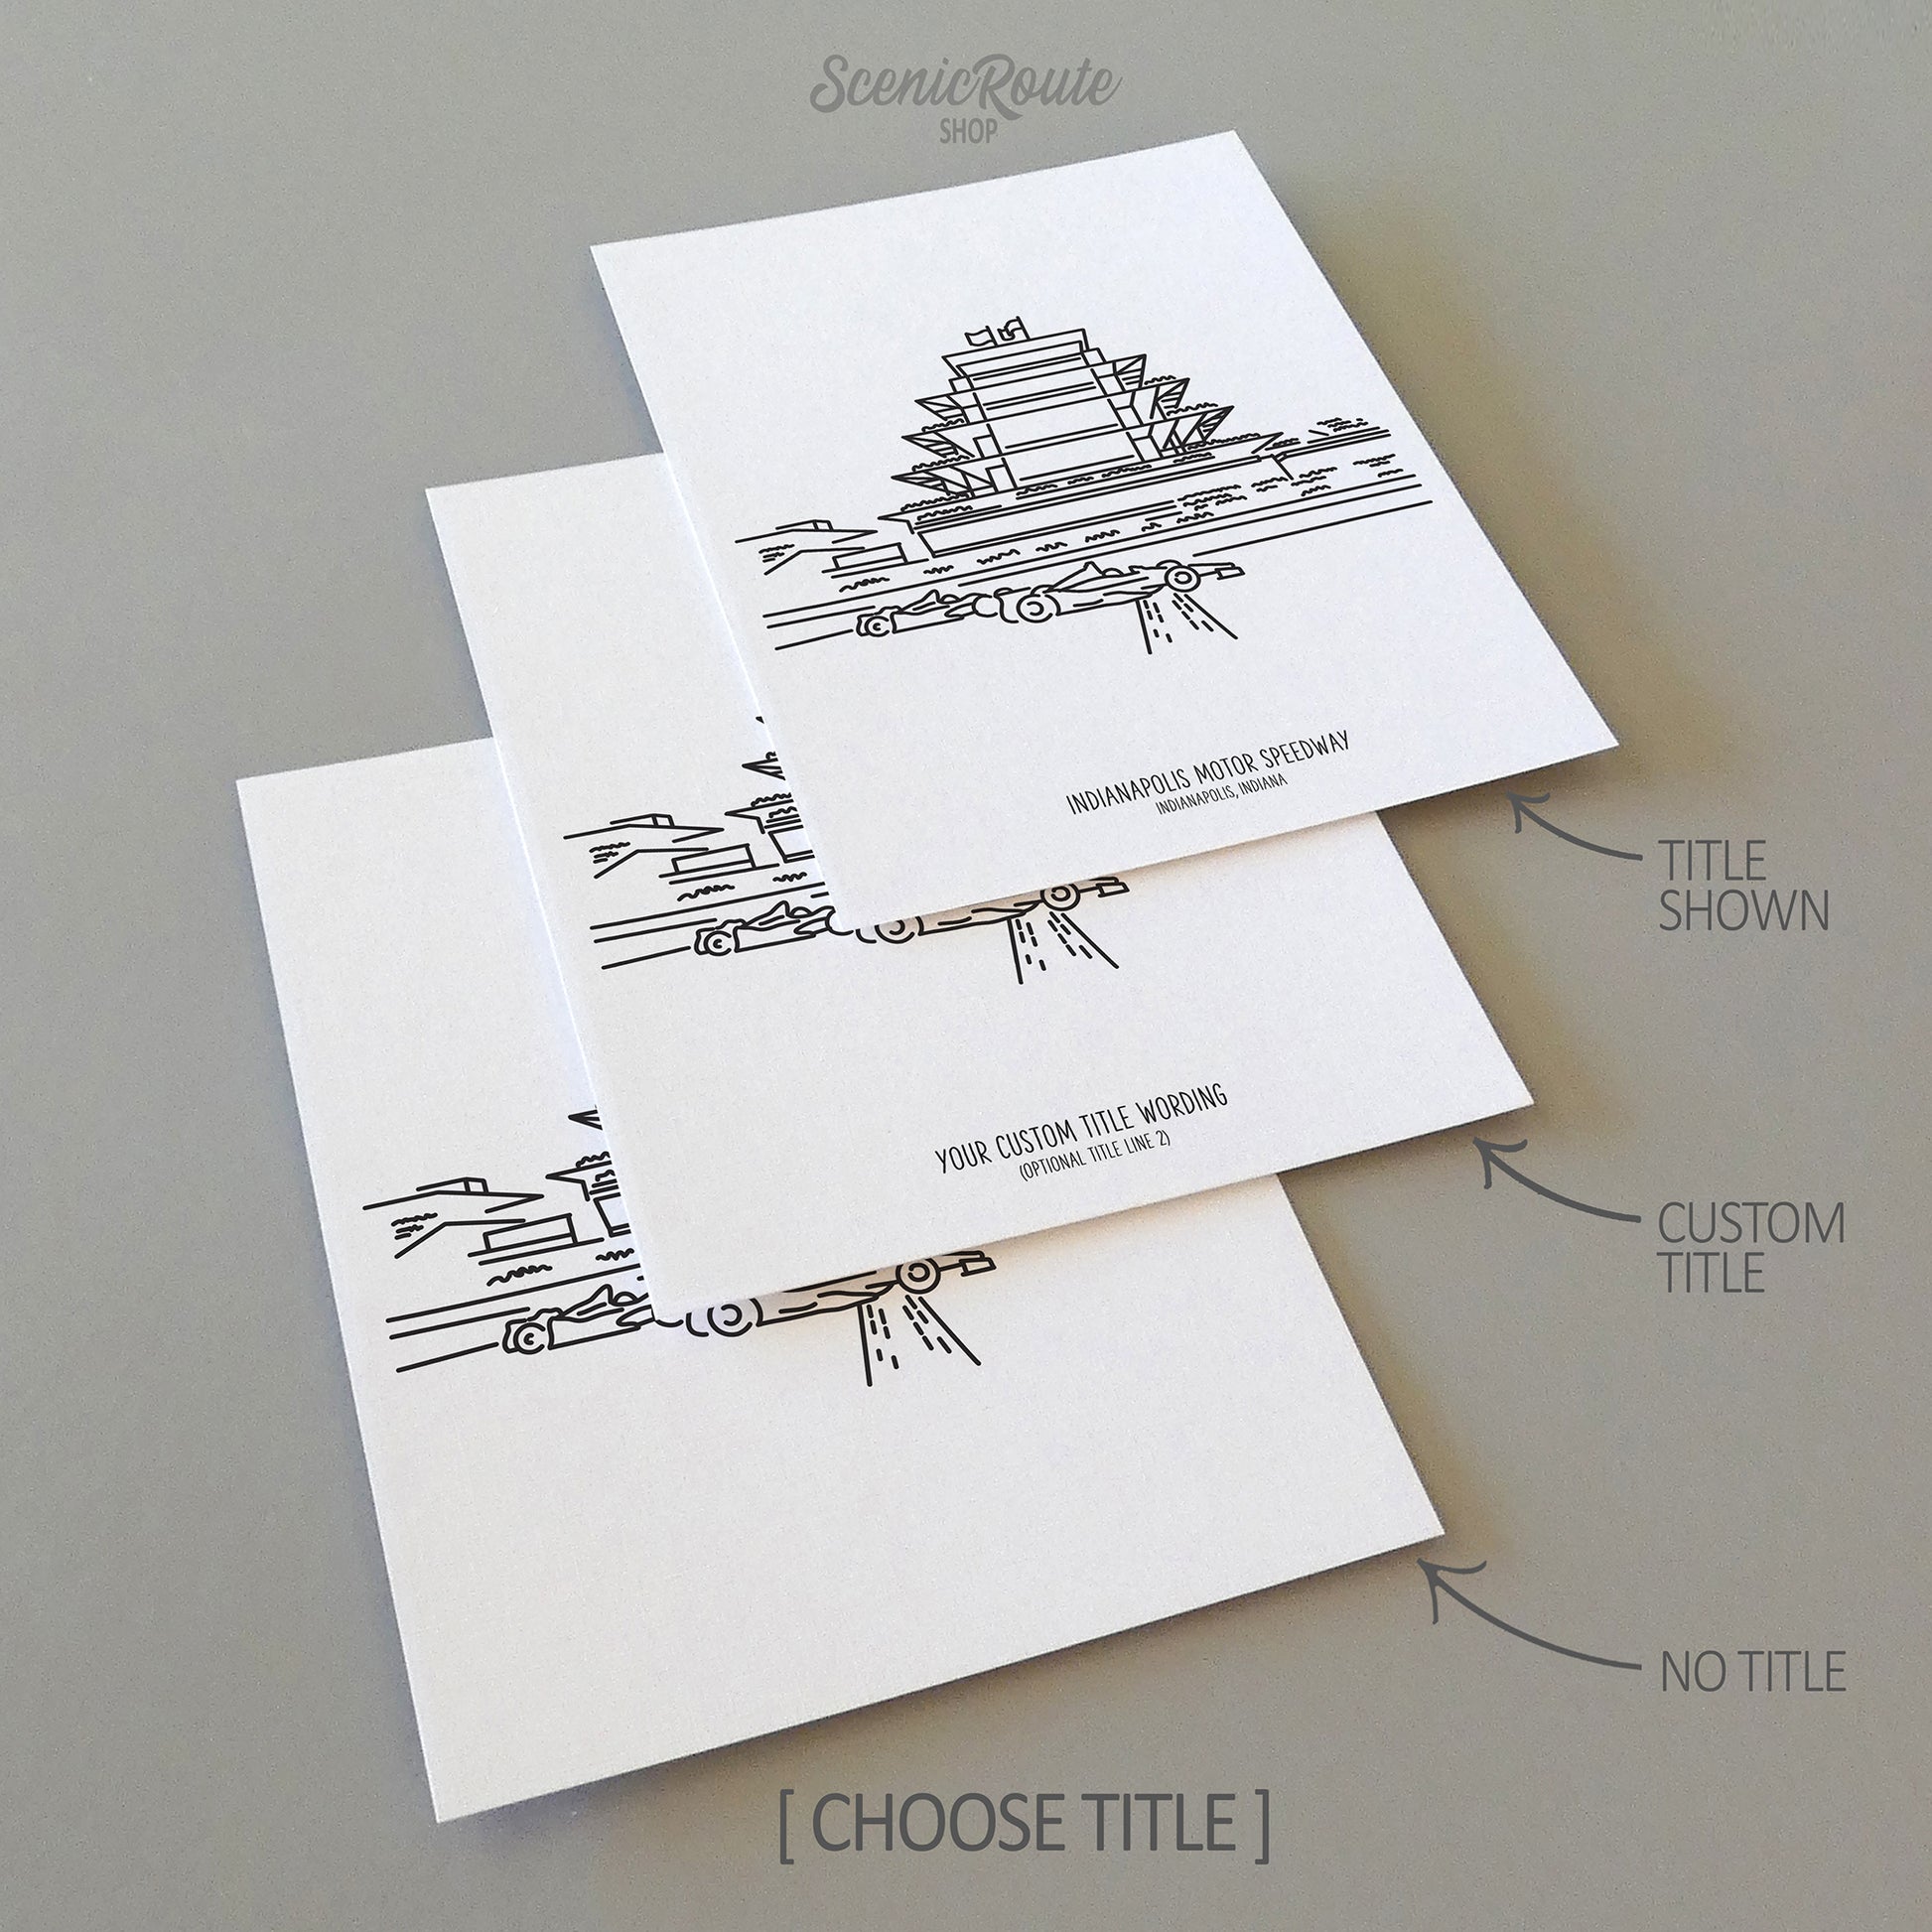 Three line art drawings of the Indianapolis Speedway Pagoda on white linen paper with a gray background.  The pieces are shown with title options that can be chosen and personalized.